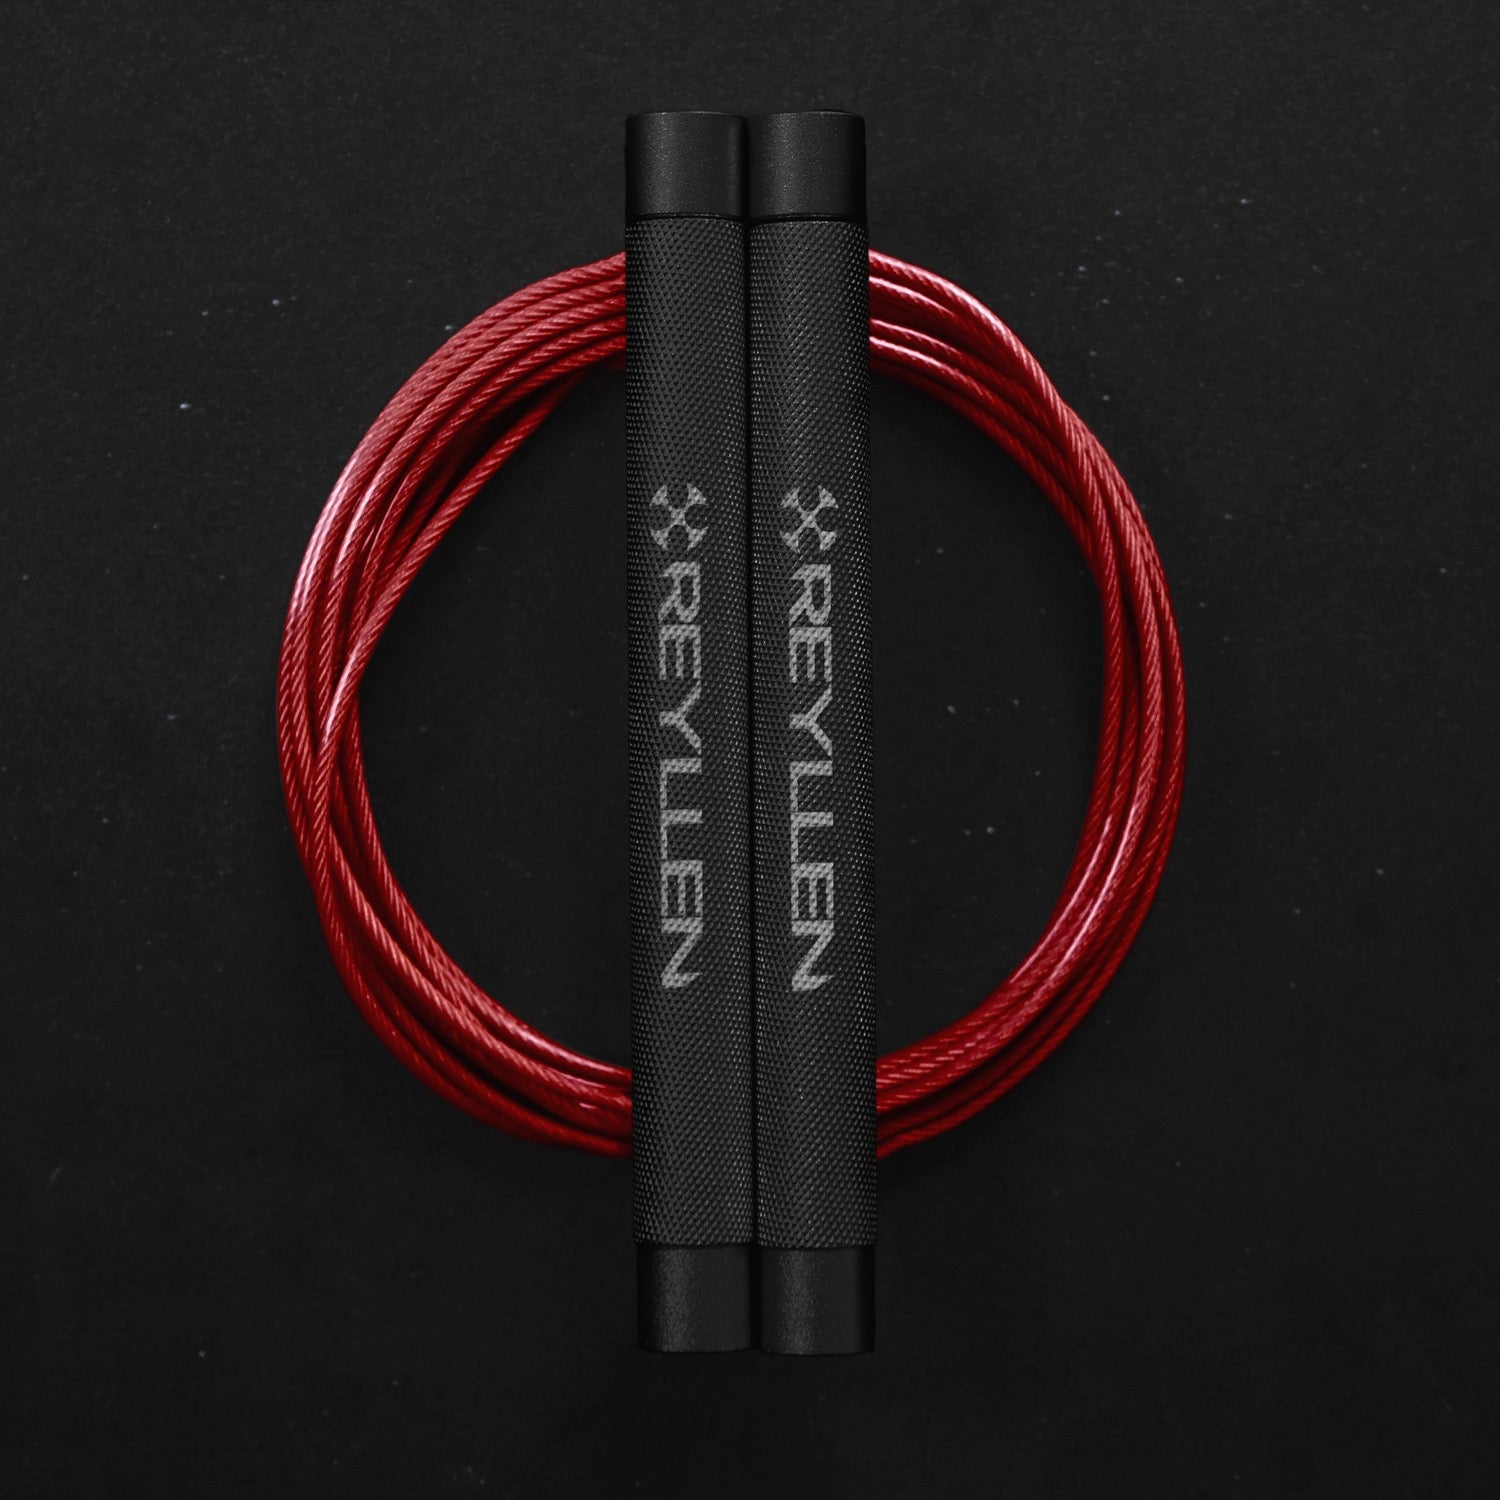 Reyllen Flare Mx Speed Skipping Jump Rope - Aluminium Handles - black with red pvc cable